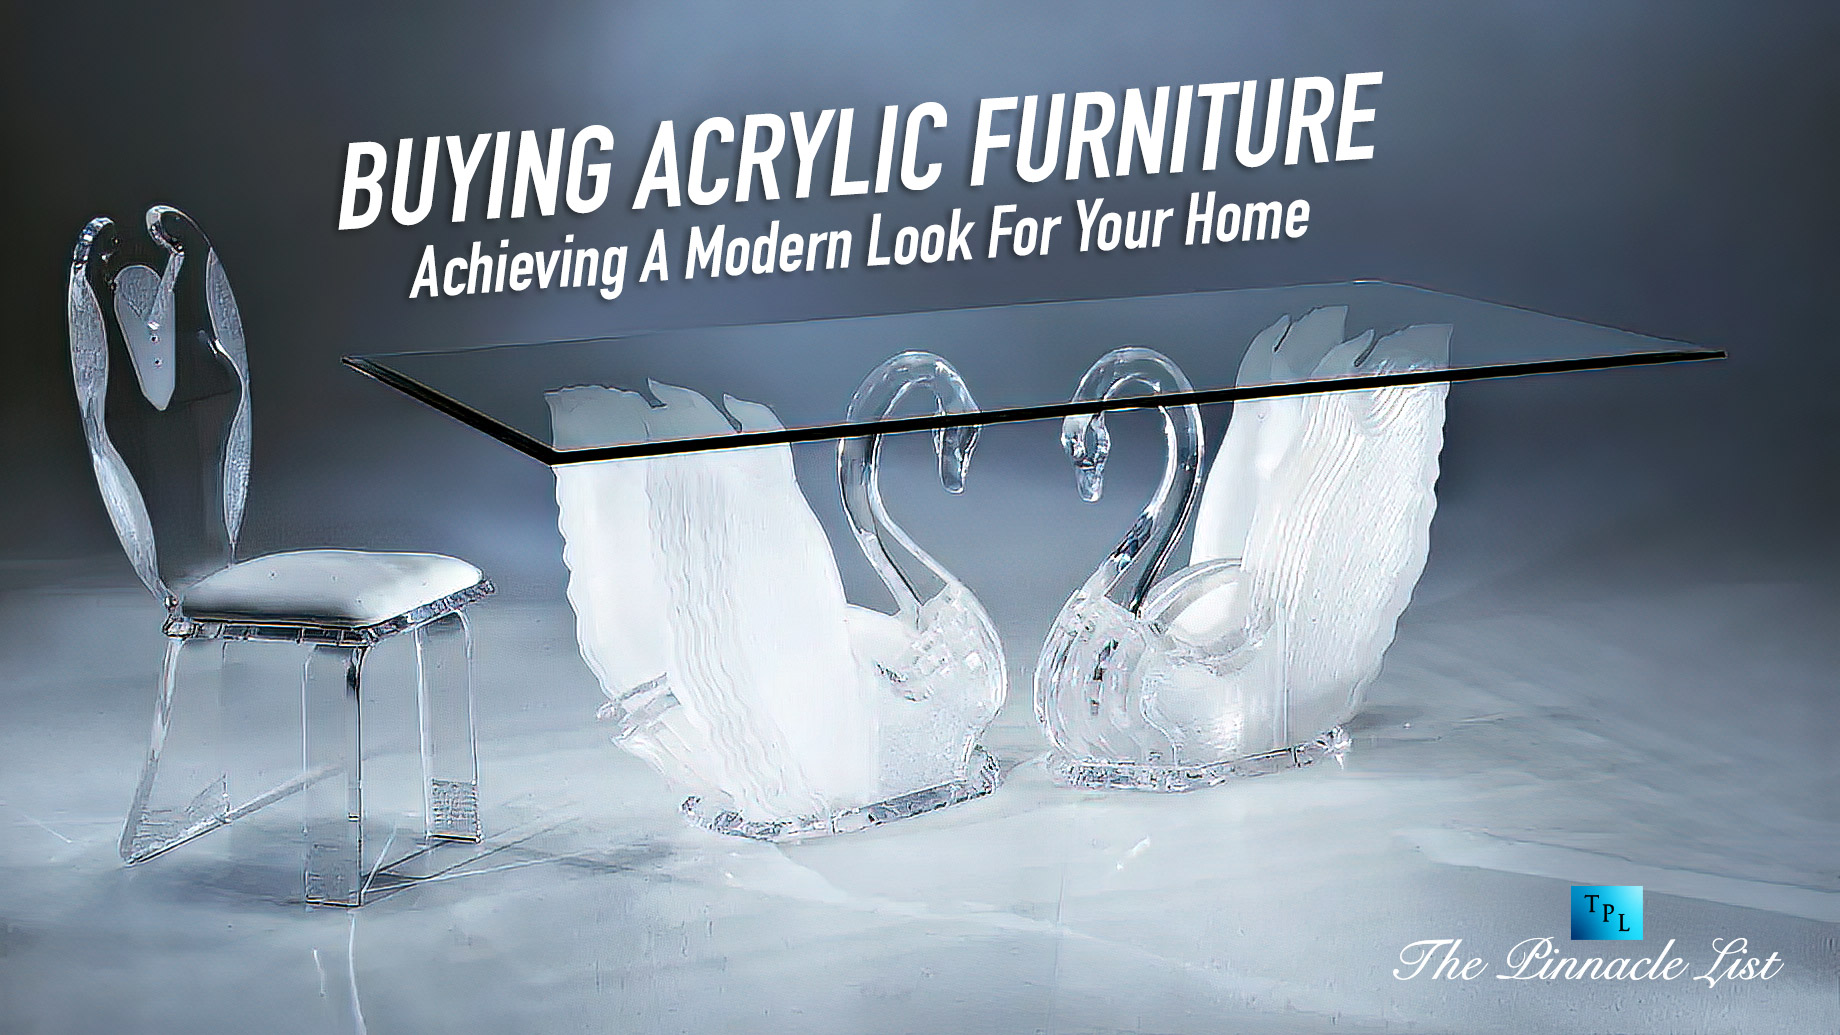 Buying Acrylic Furniture - Achieving A Modern Look For Your Home